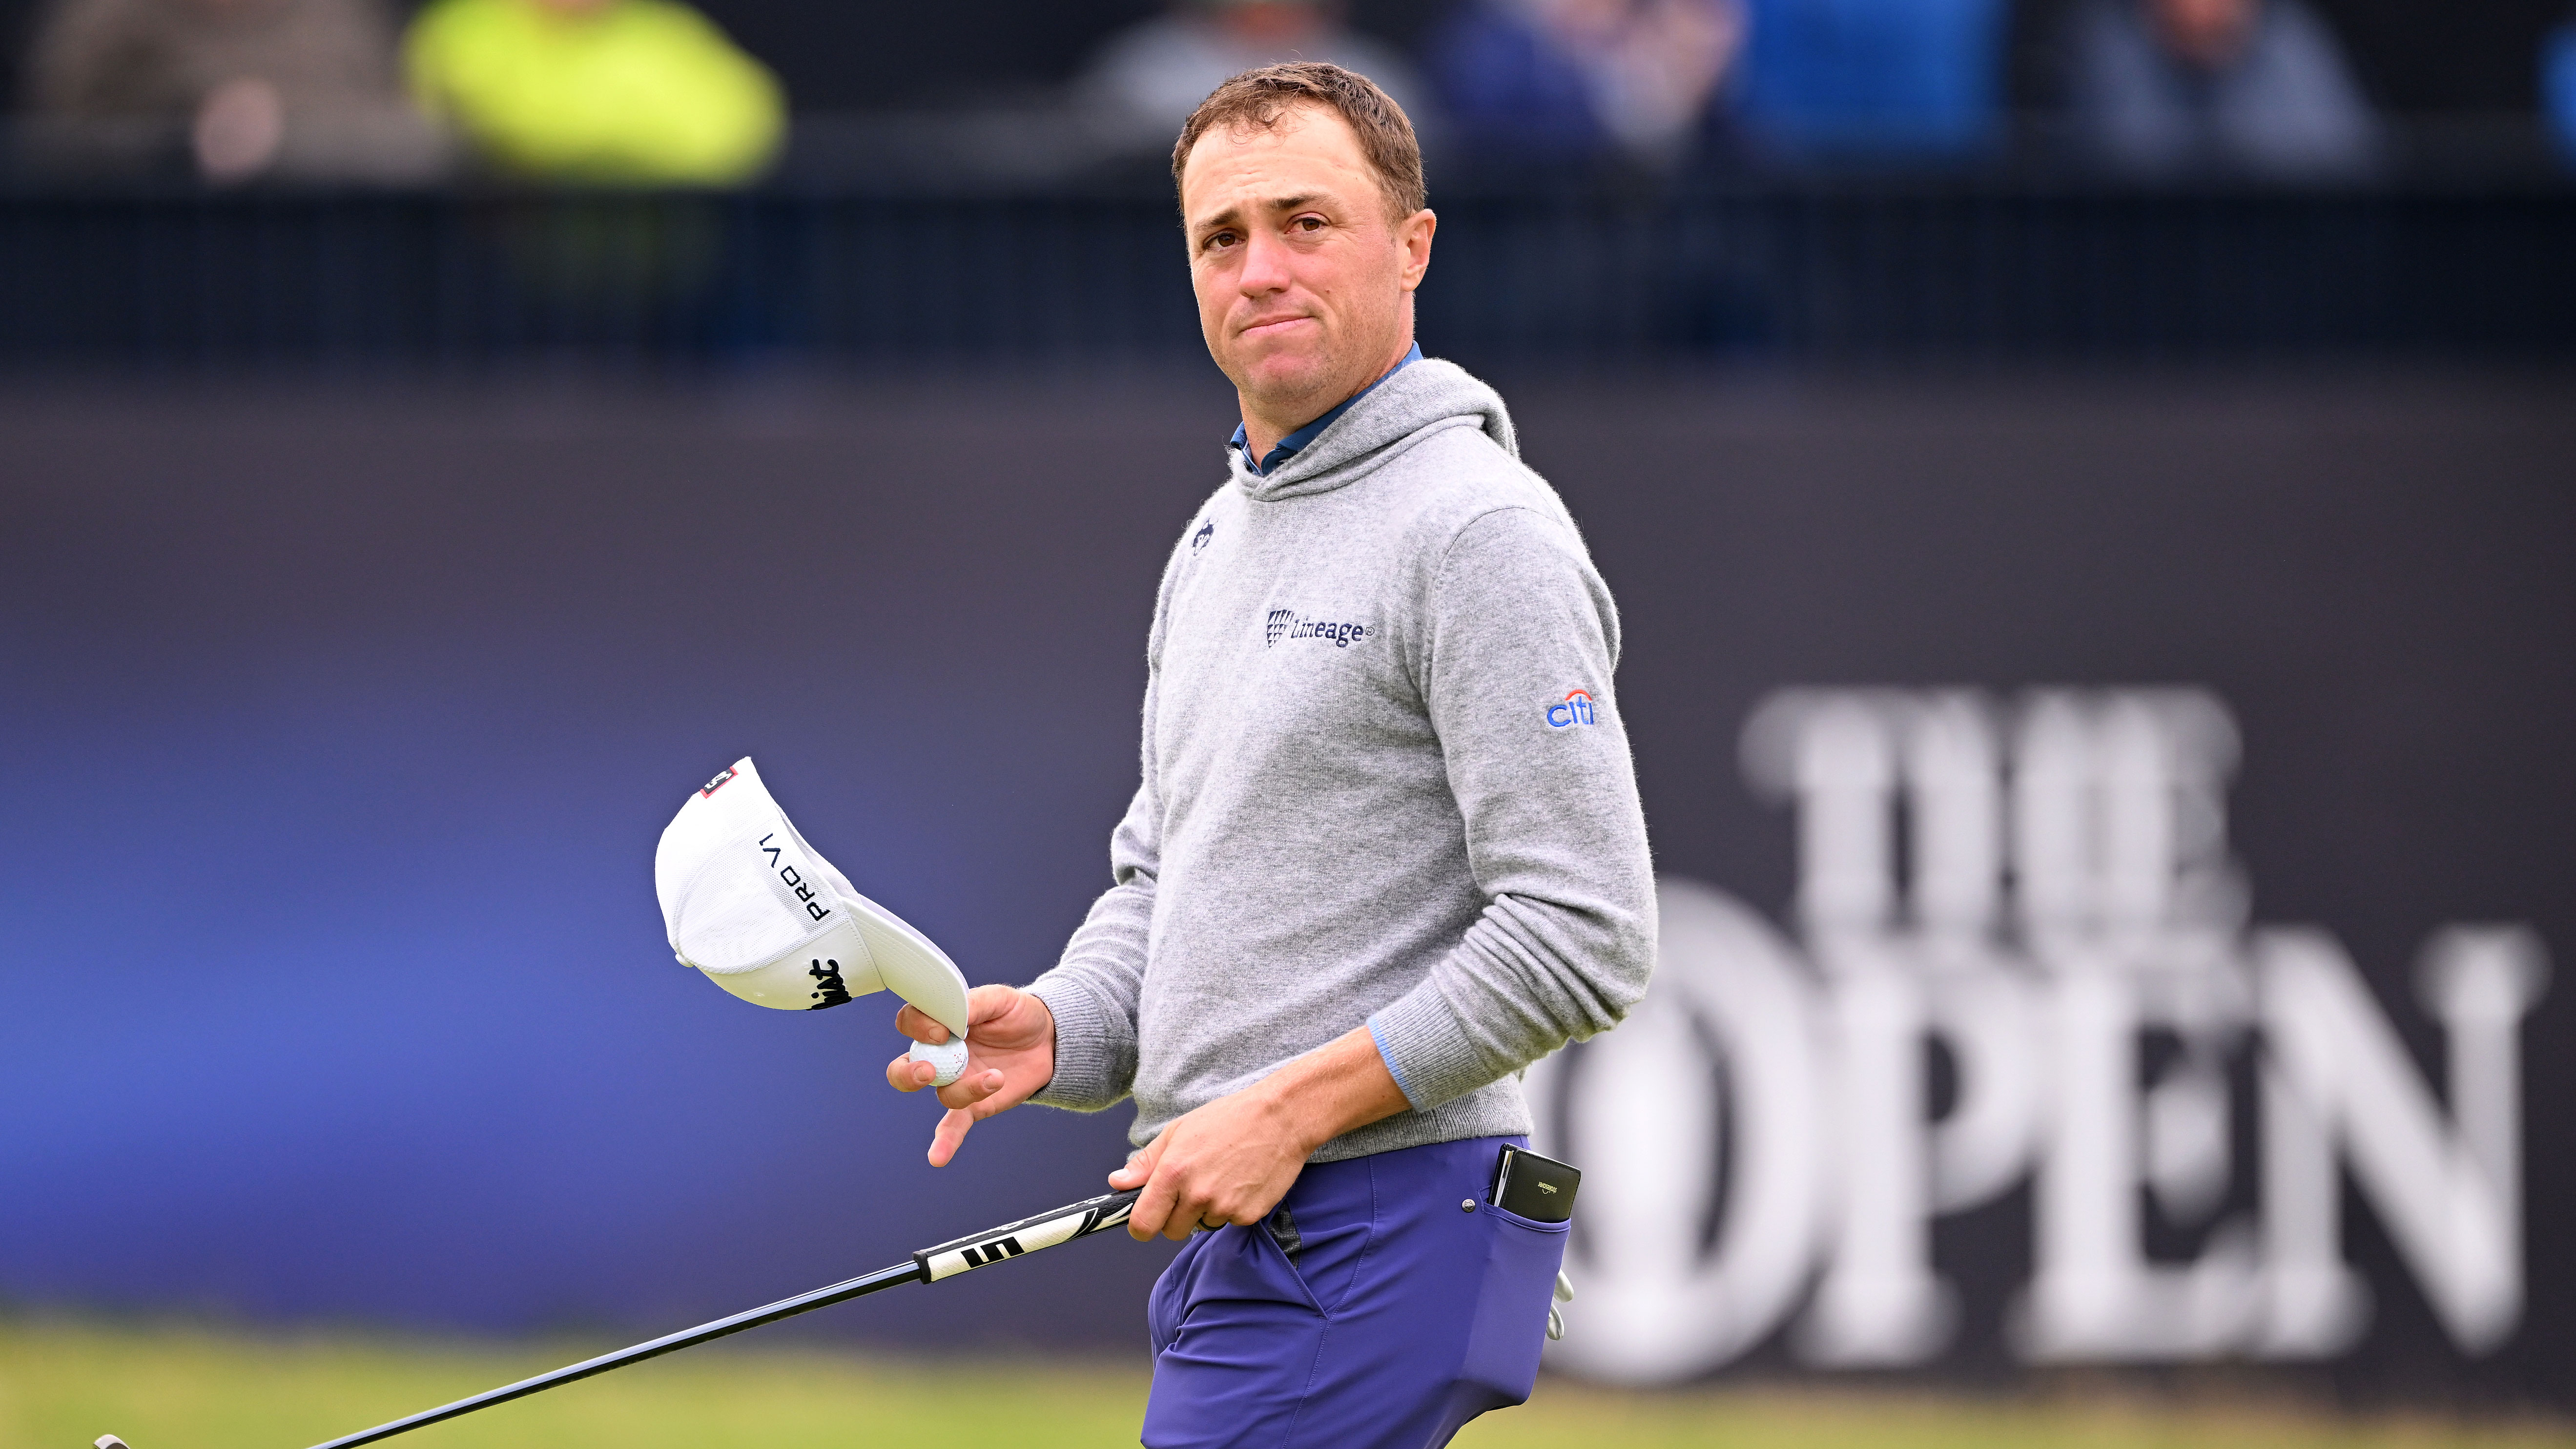 Justin Thomas steadies himself in wind and rain for early British Open lead